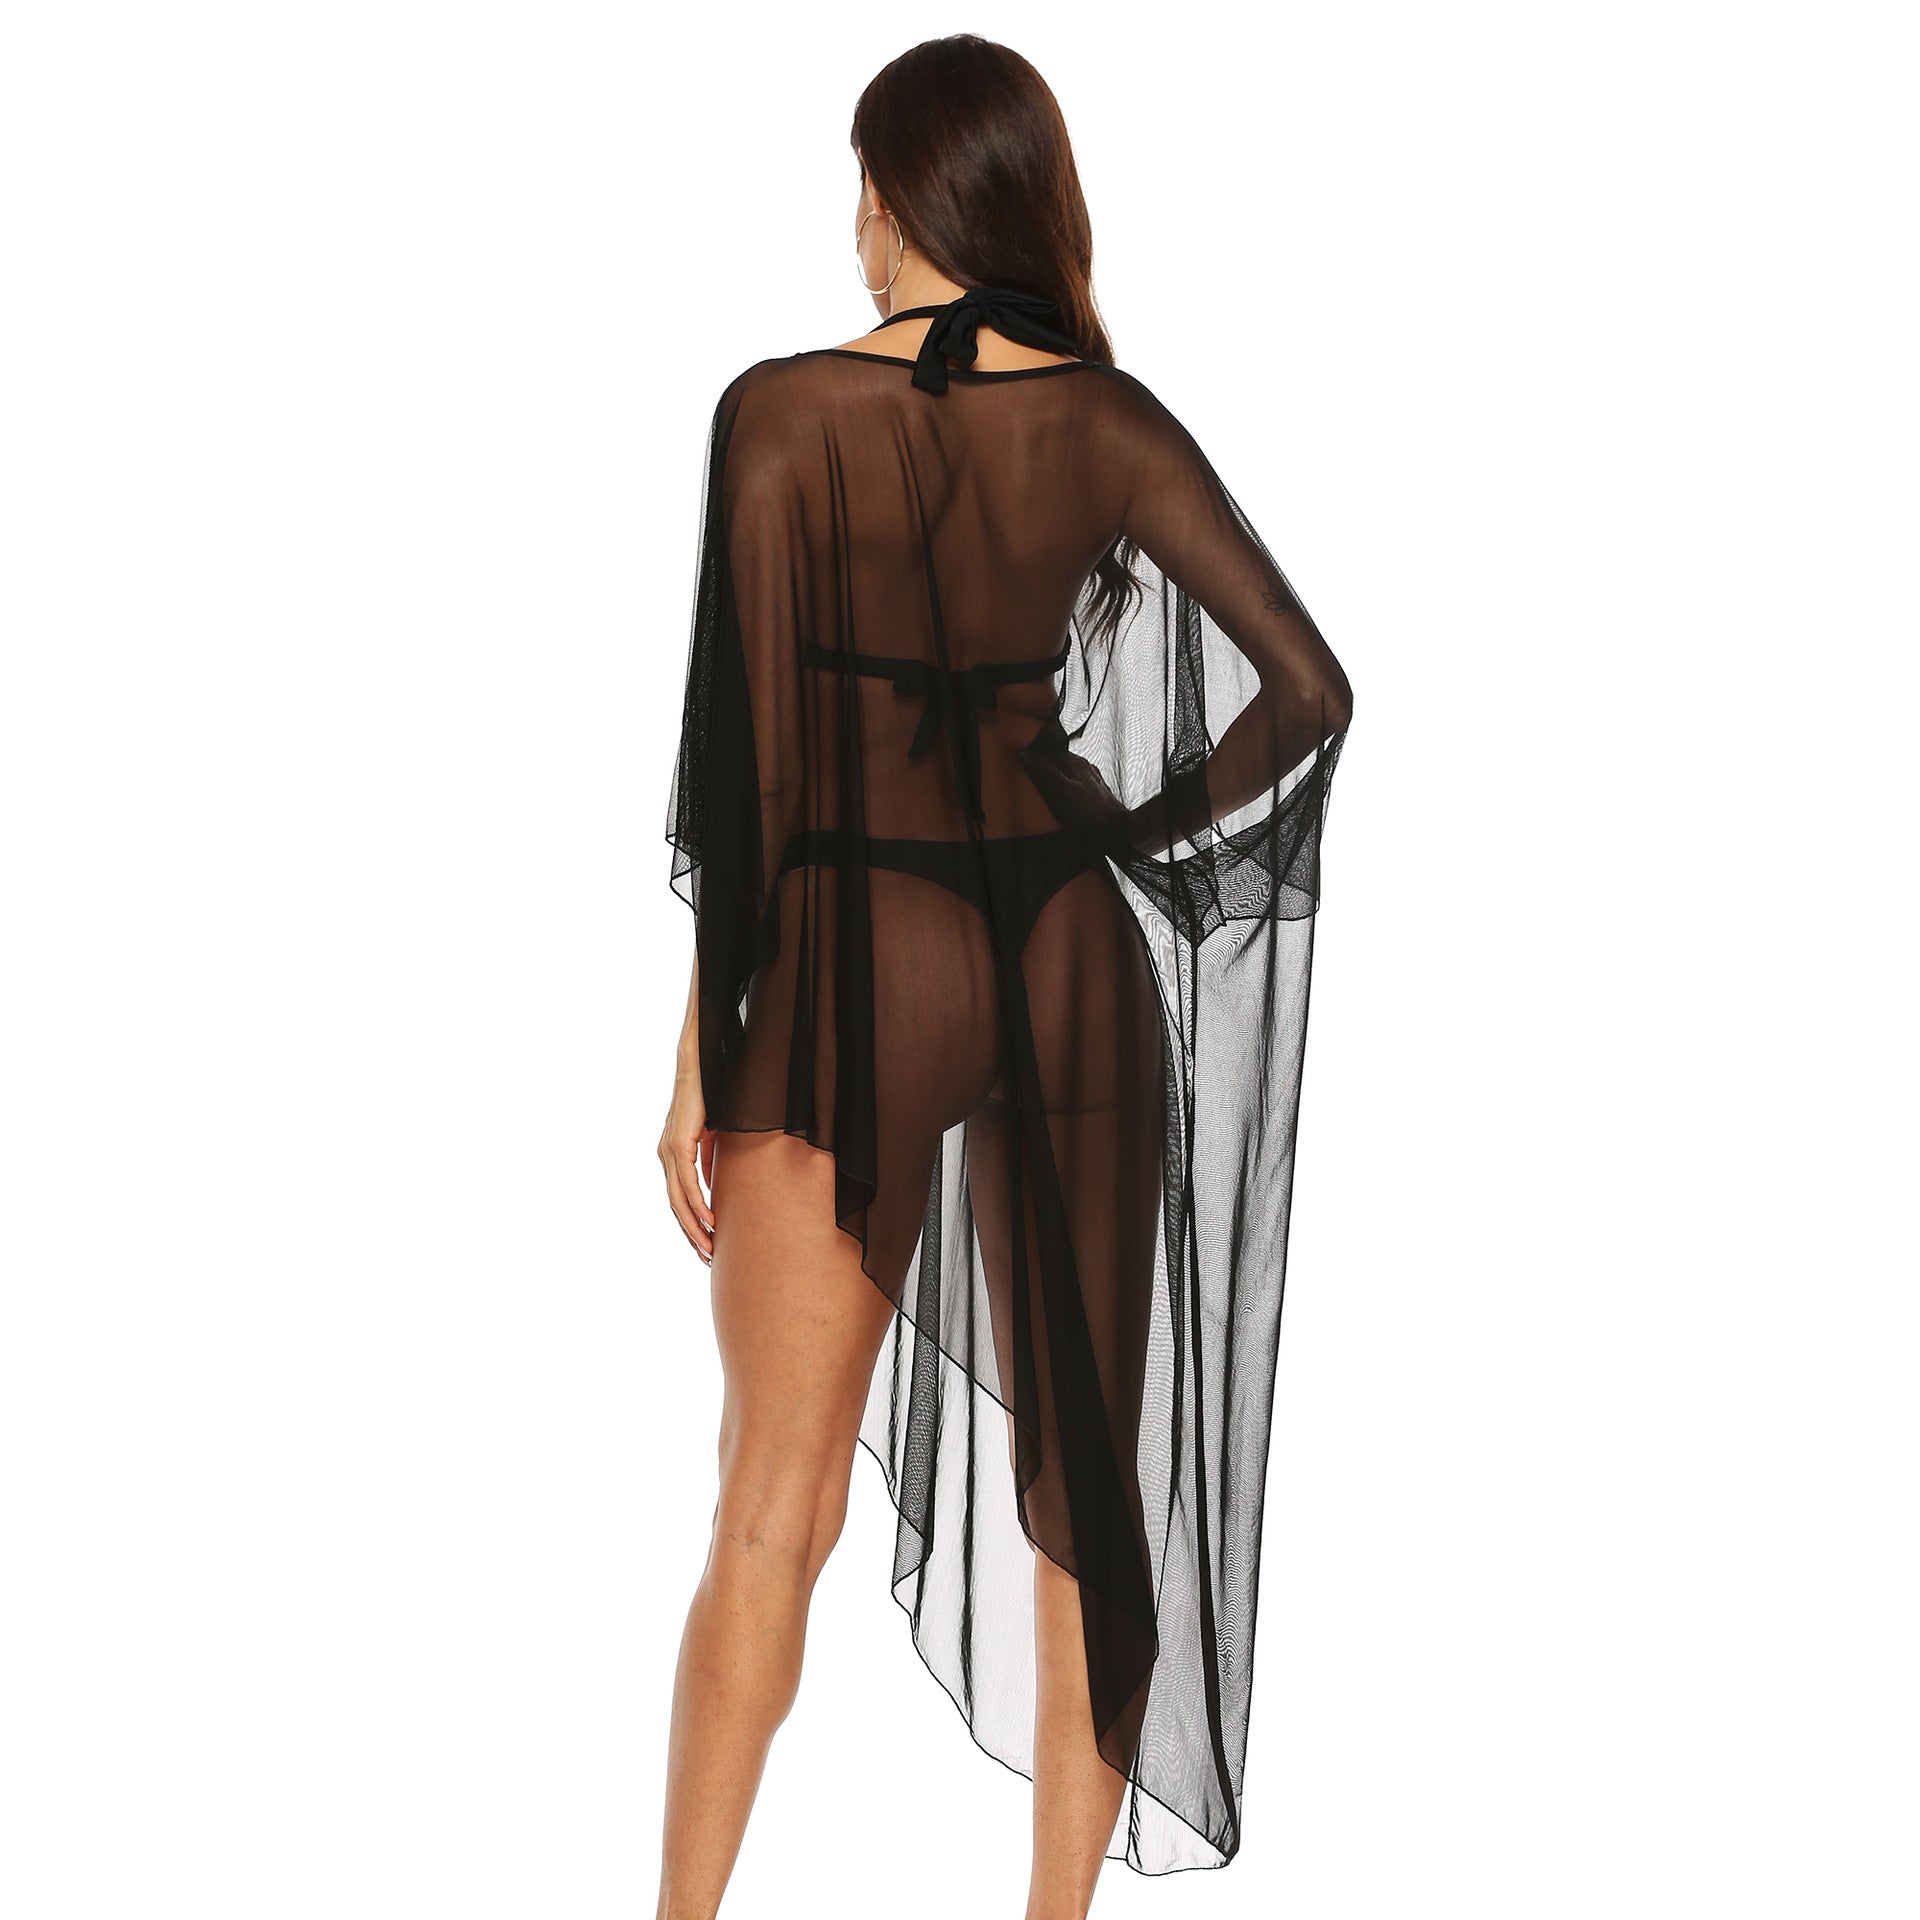 Irregular Tulle See Through Summer Beach Cover Ups-Swimwear-Black-One Size-Free Shipping at meselling99